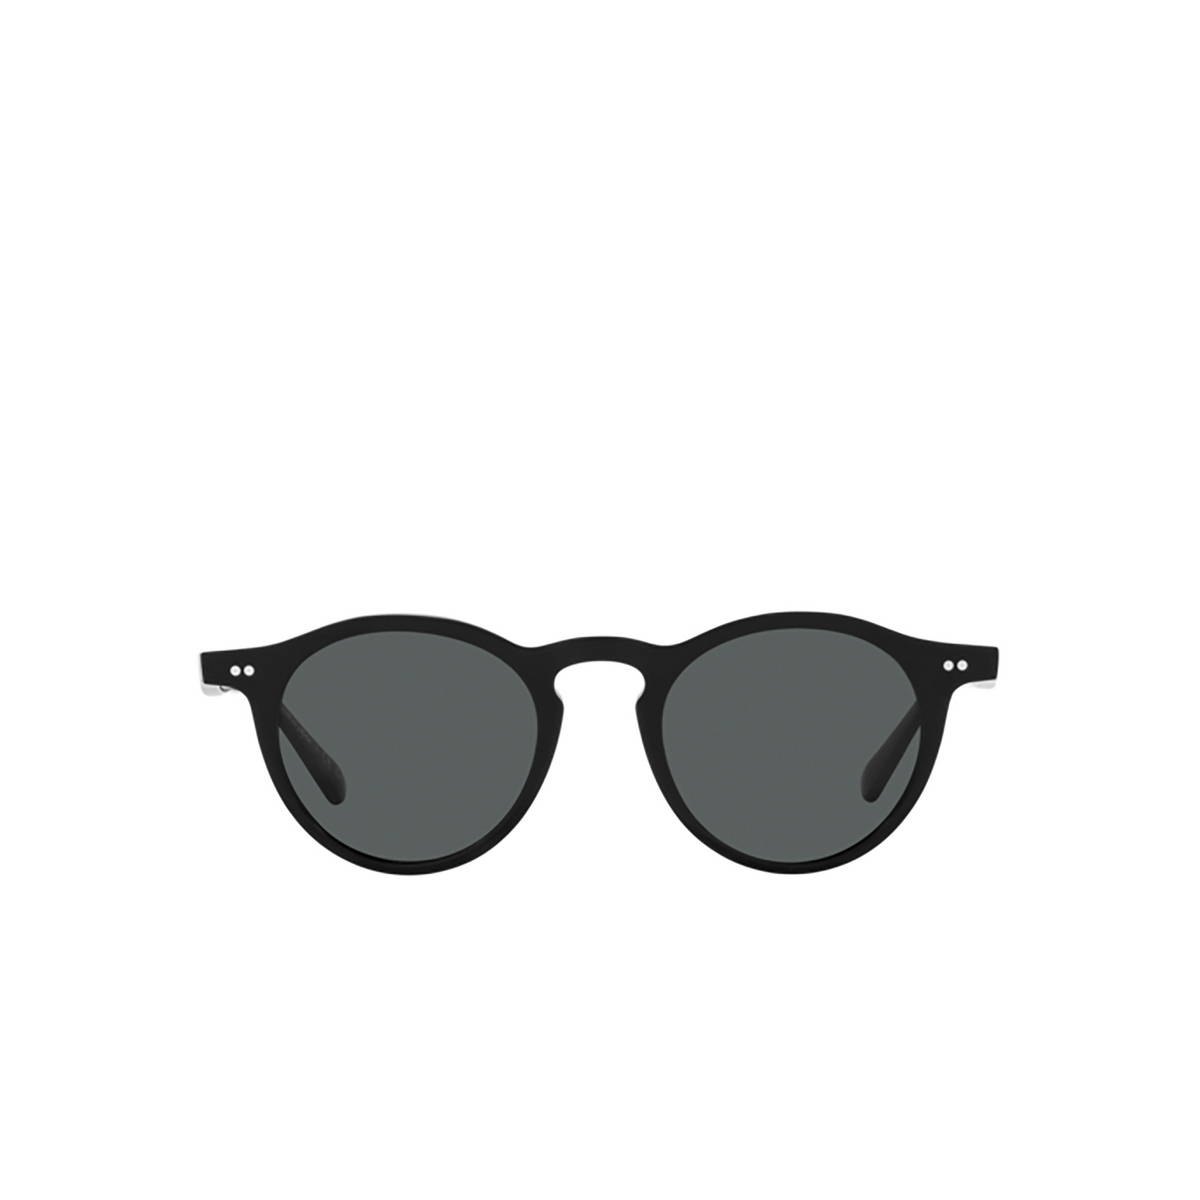 Oliver Peoples OP-13 Sunglasses 1731P2 Black - front view